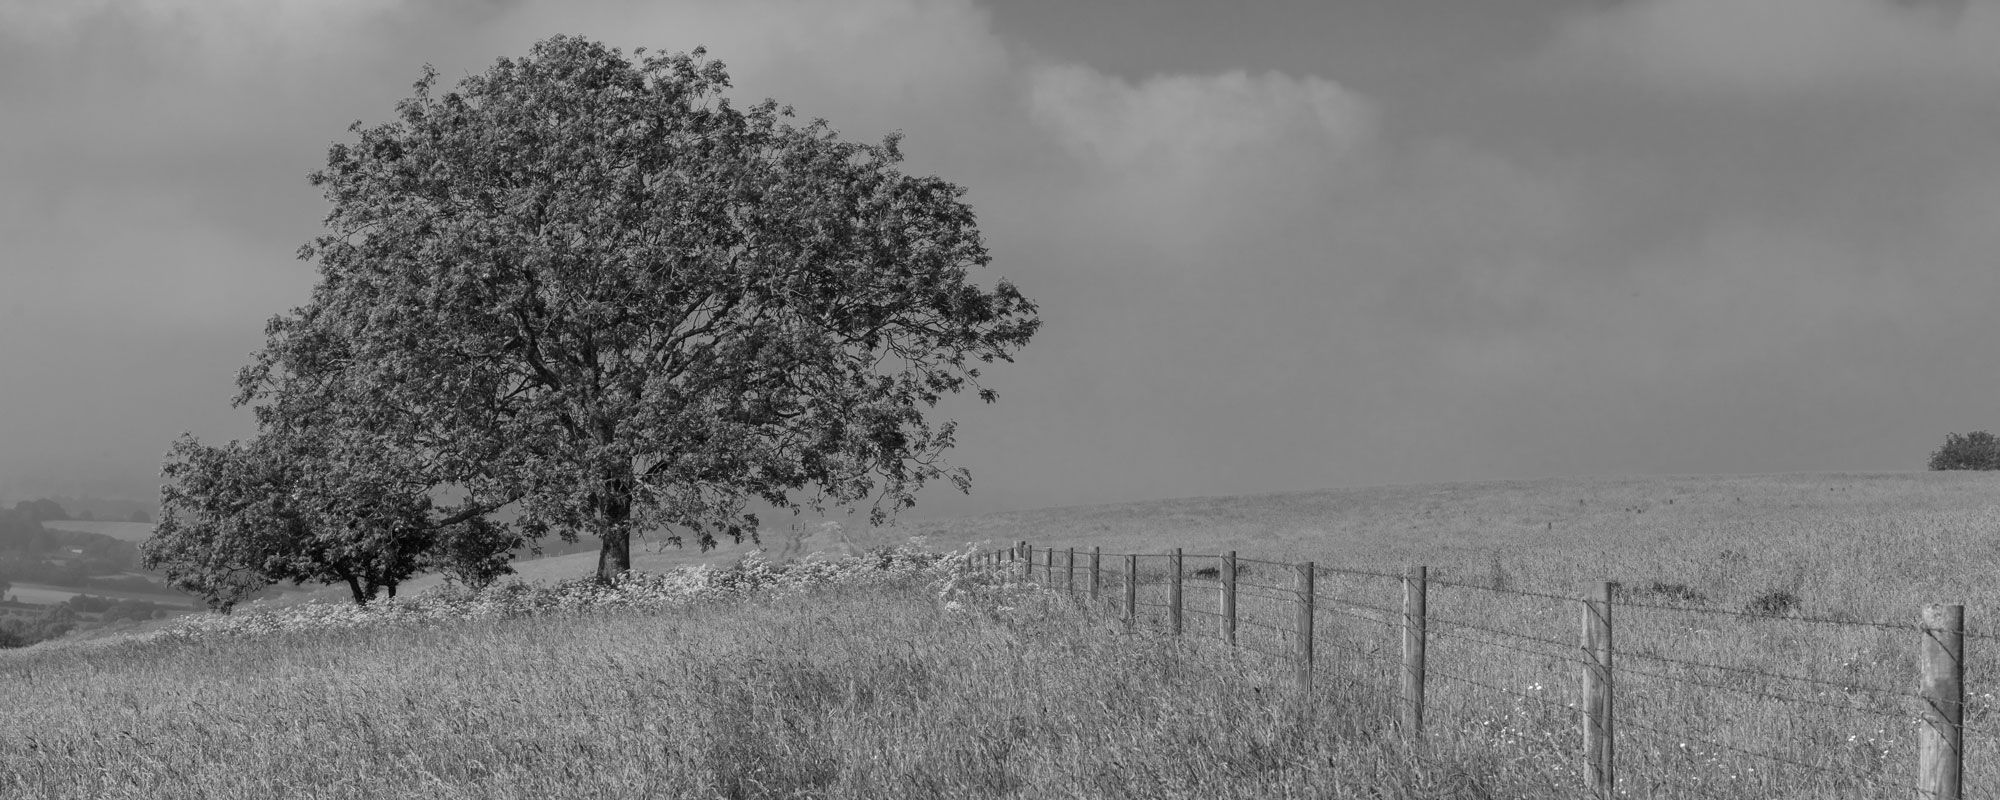 Black and white old tree in UK rural area